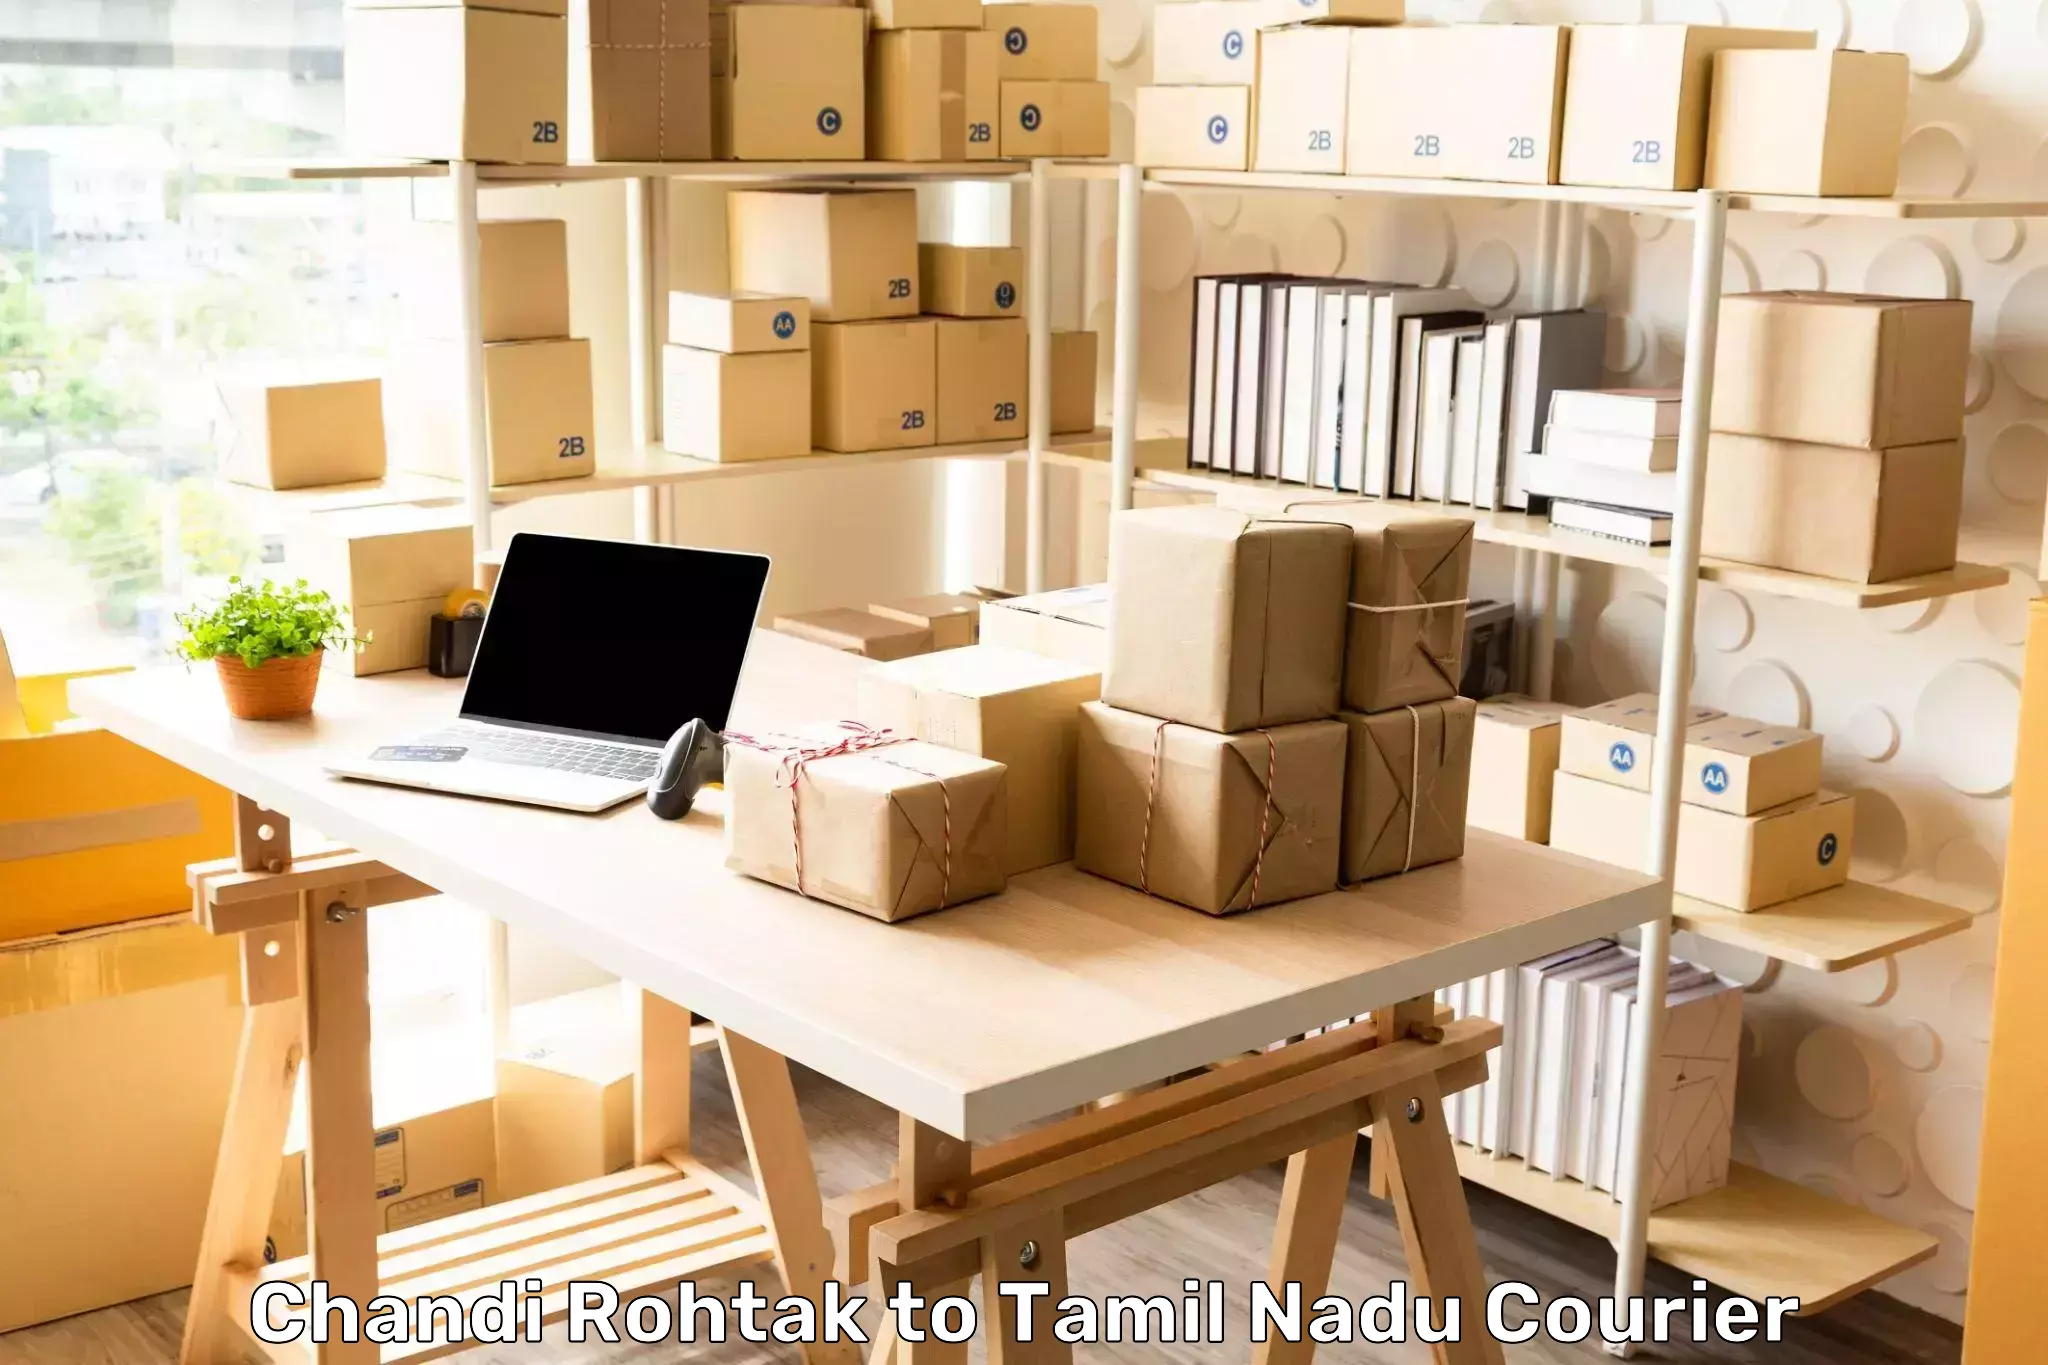 Reliable delivery network Chandi Rohtak to Kanchipuram